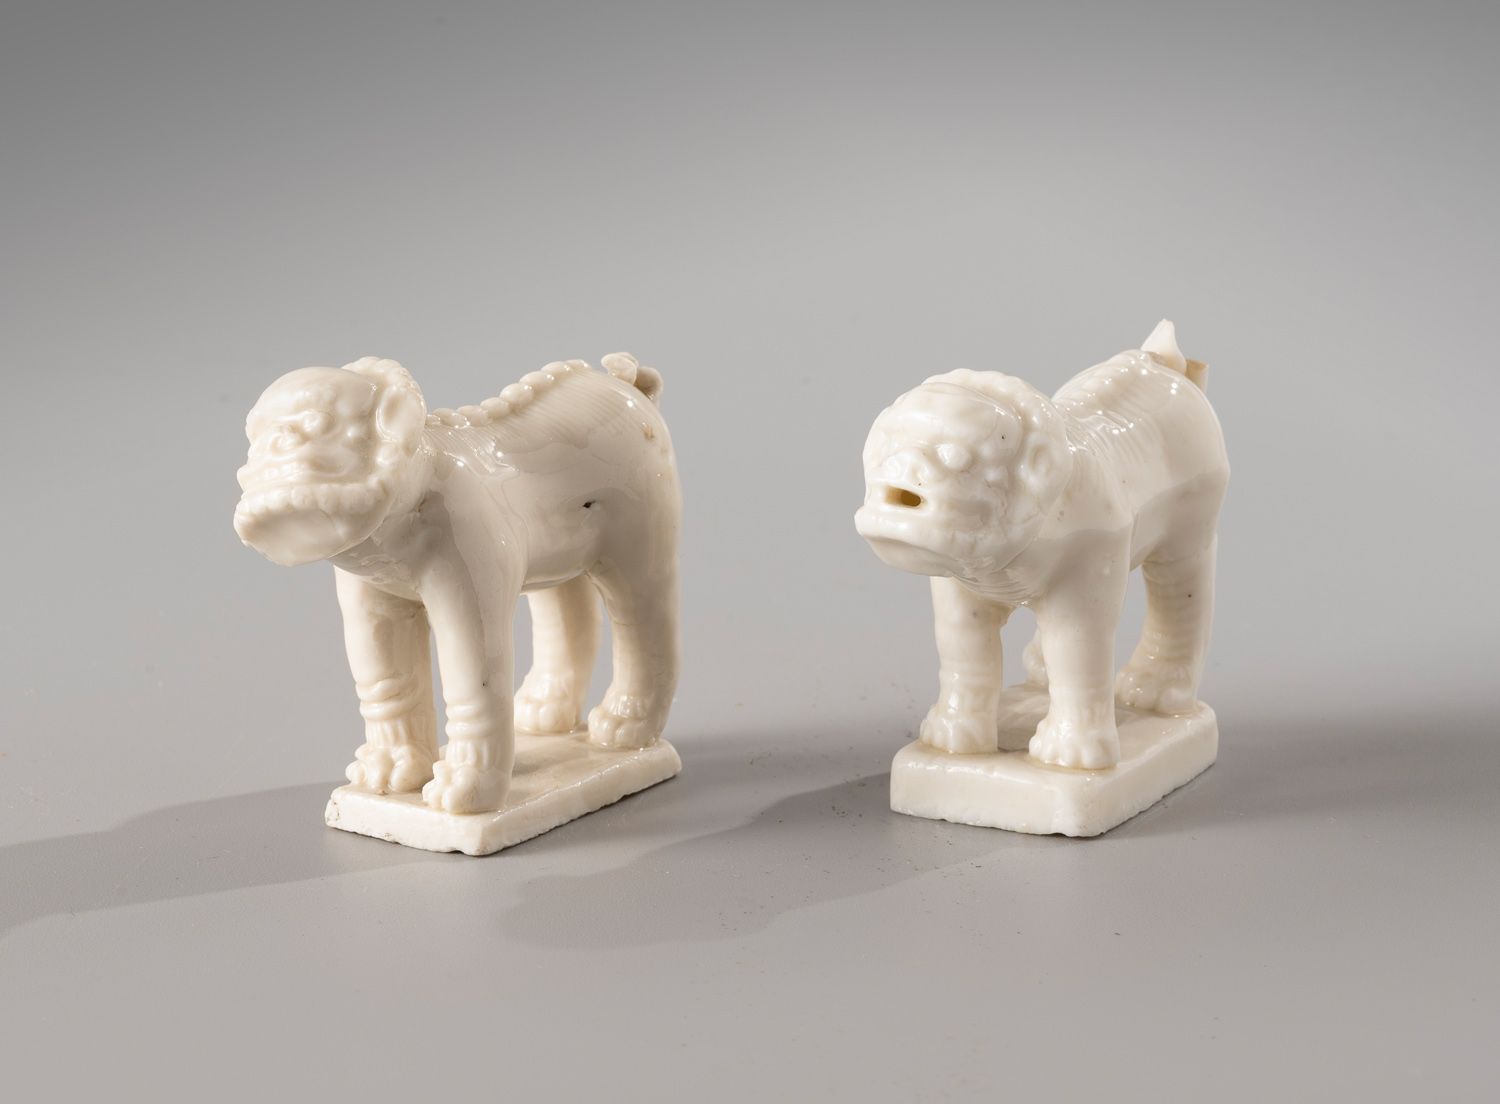 Null CHINA, Kangxi period, 18th century

Pair of white porcelain subjects,

repr&hellip;